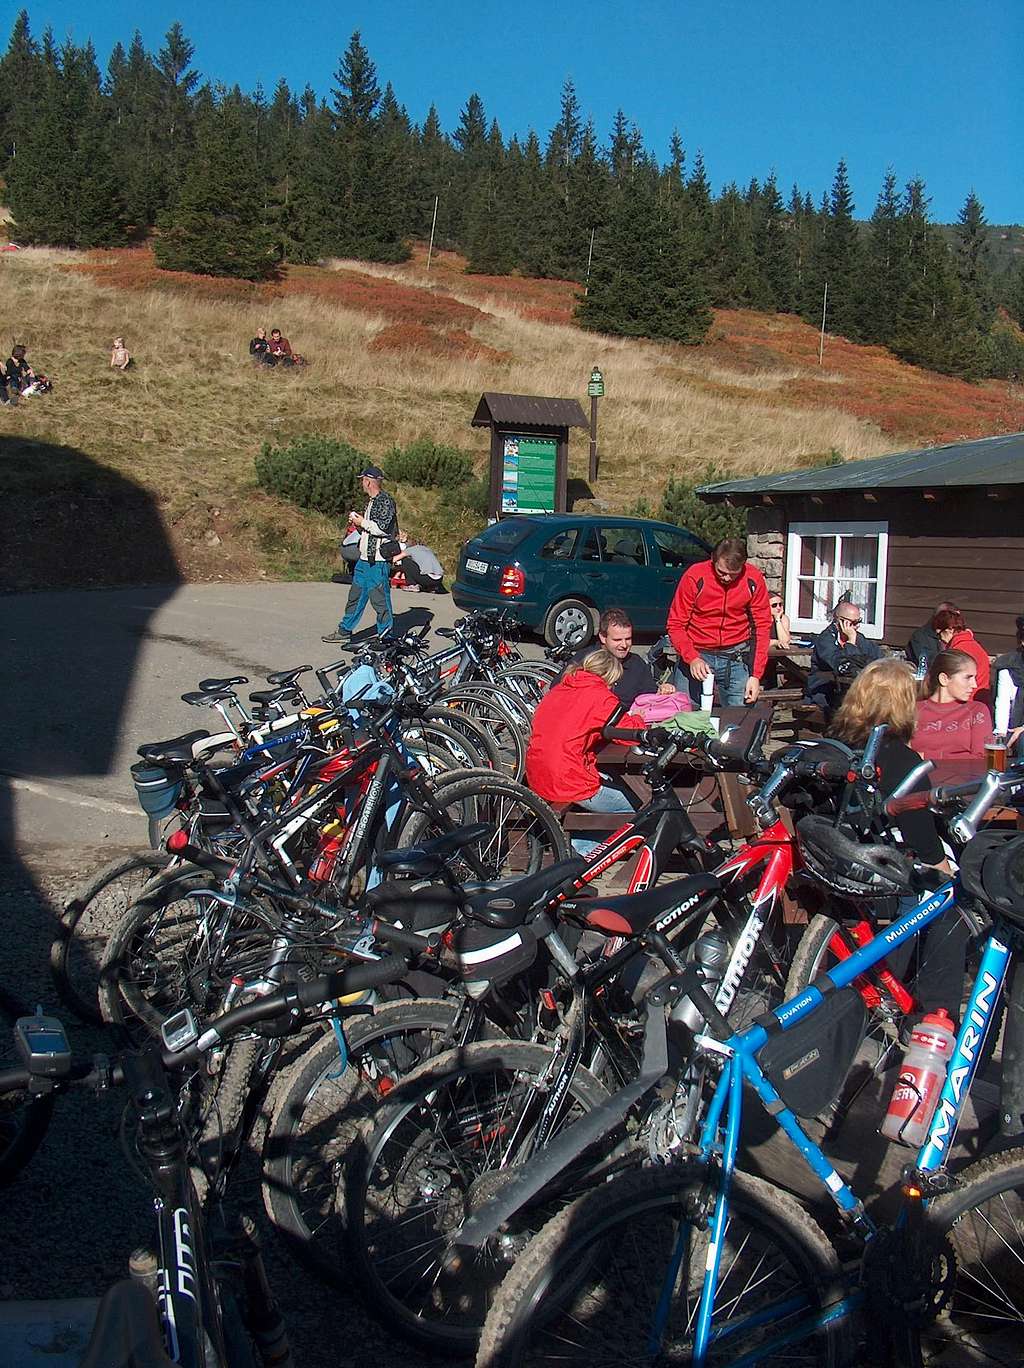 Cycling in mountains, a popular hobby in Czech Republic...